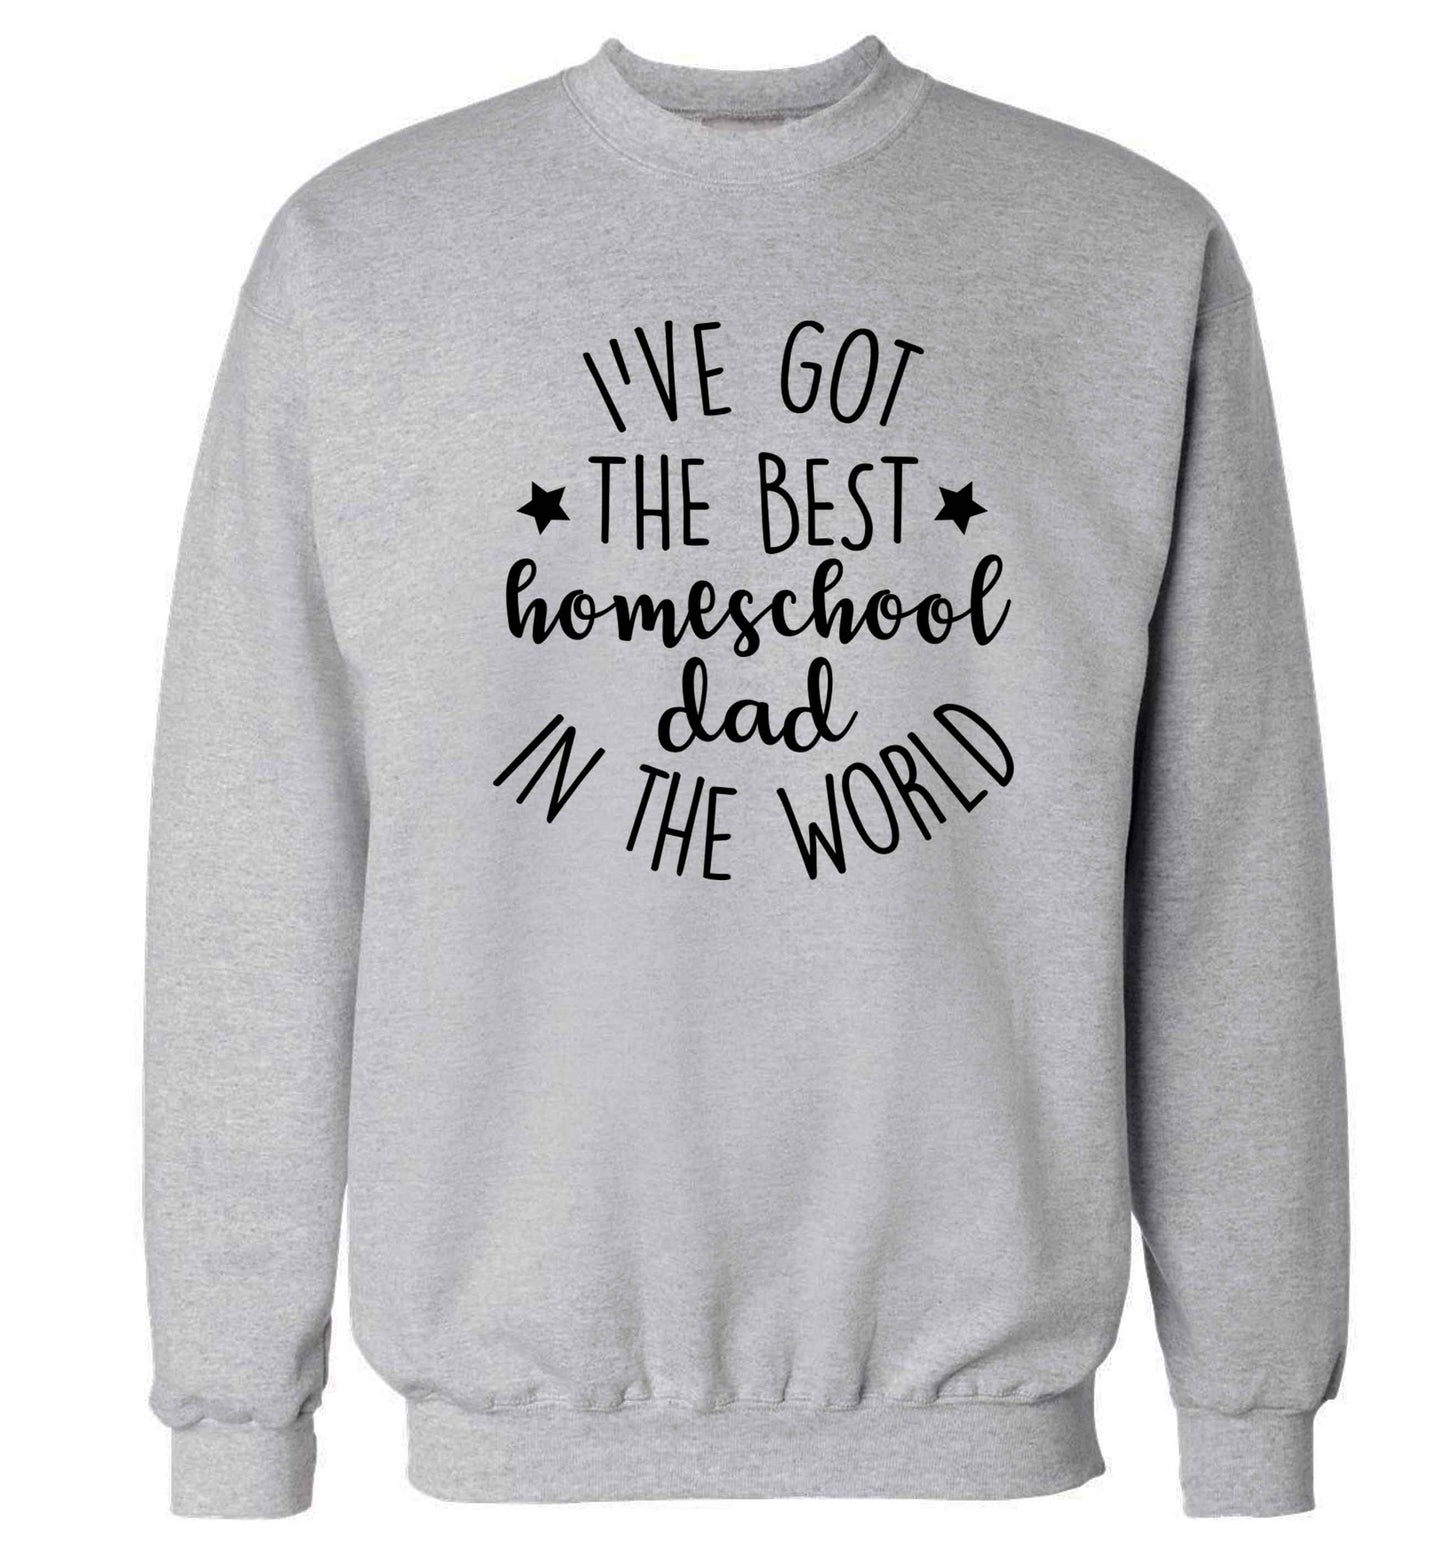 I've got the best homeschool dad in the world Adult's unisex grey Sweater 2XL